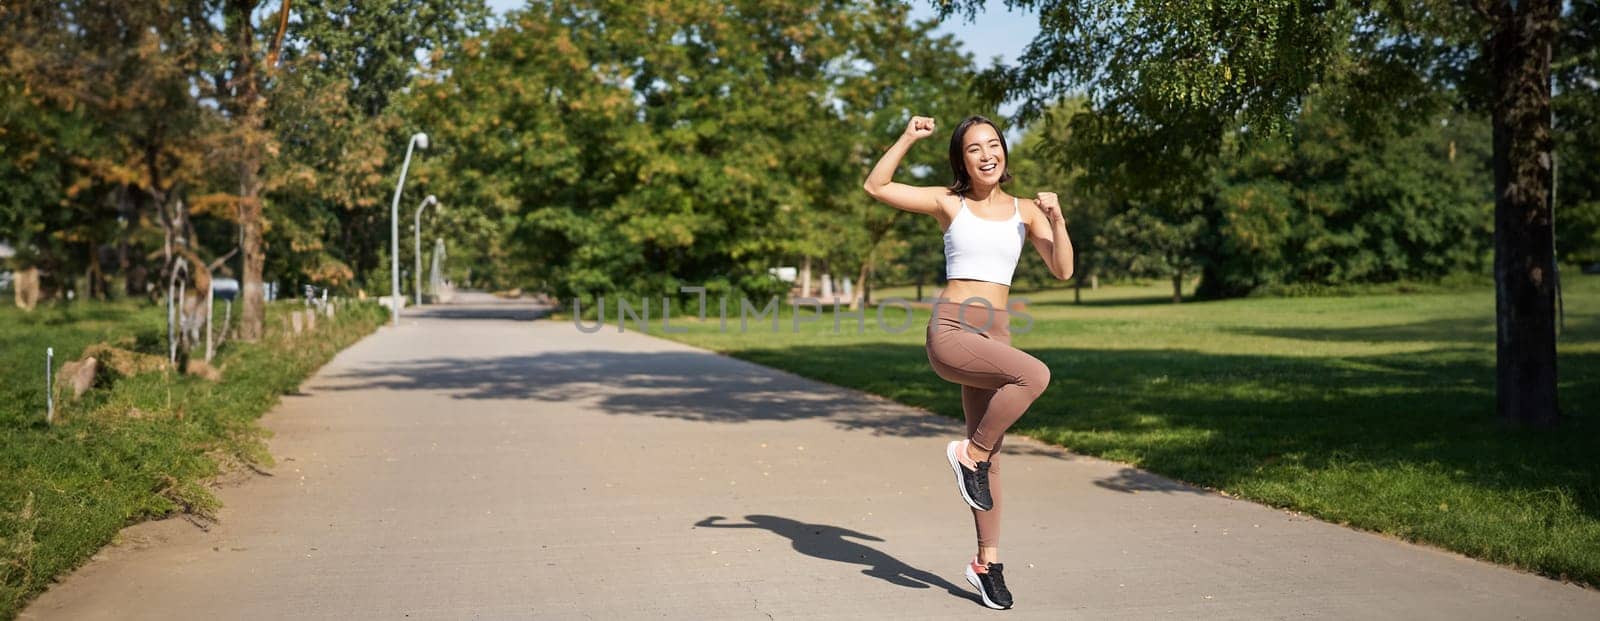 Excited young asian woman winning, finish running in park, saying yes, lifting hand up in triumph, celebrating victory or success.